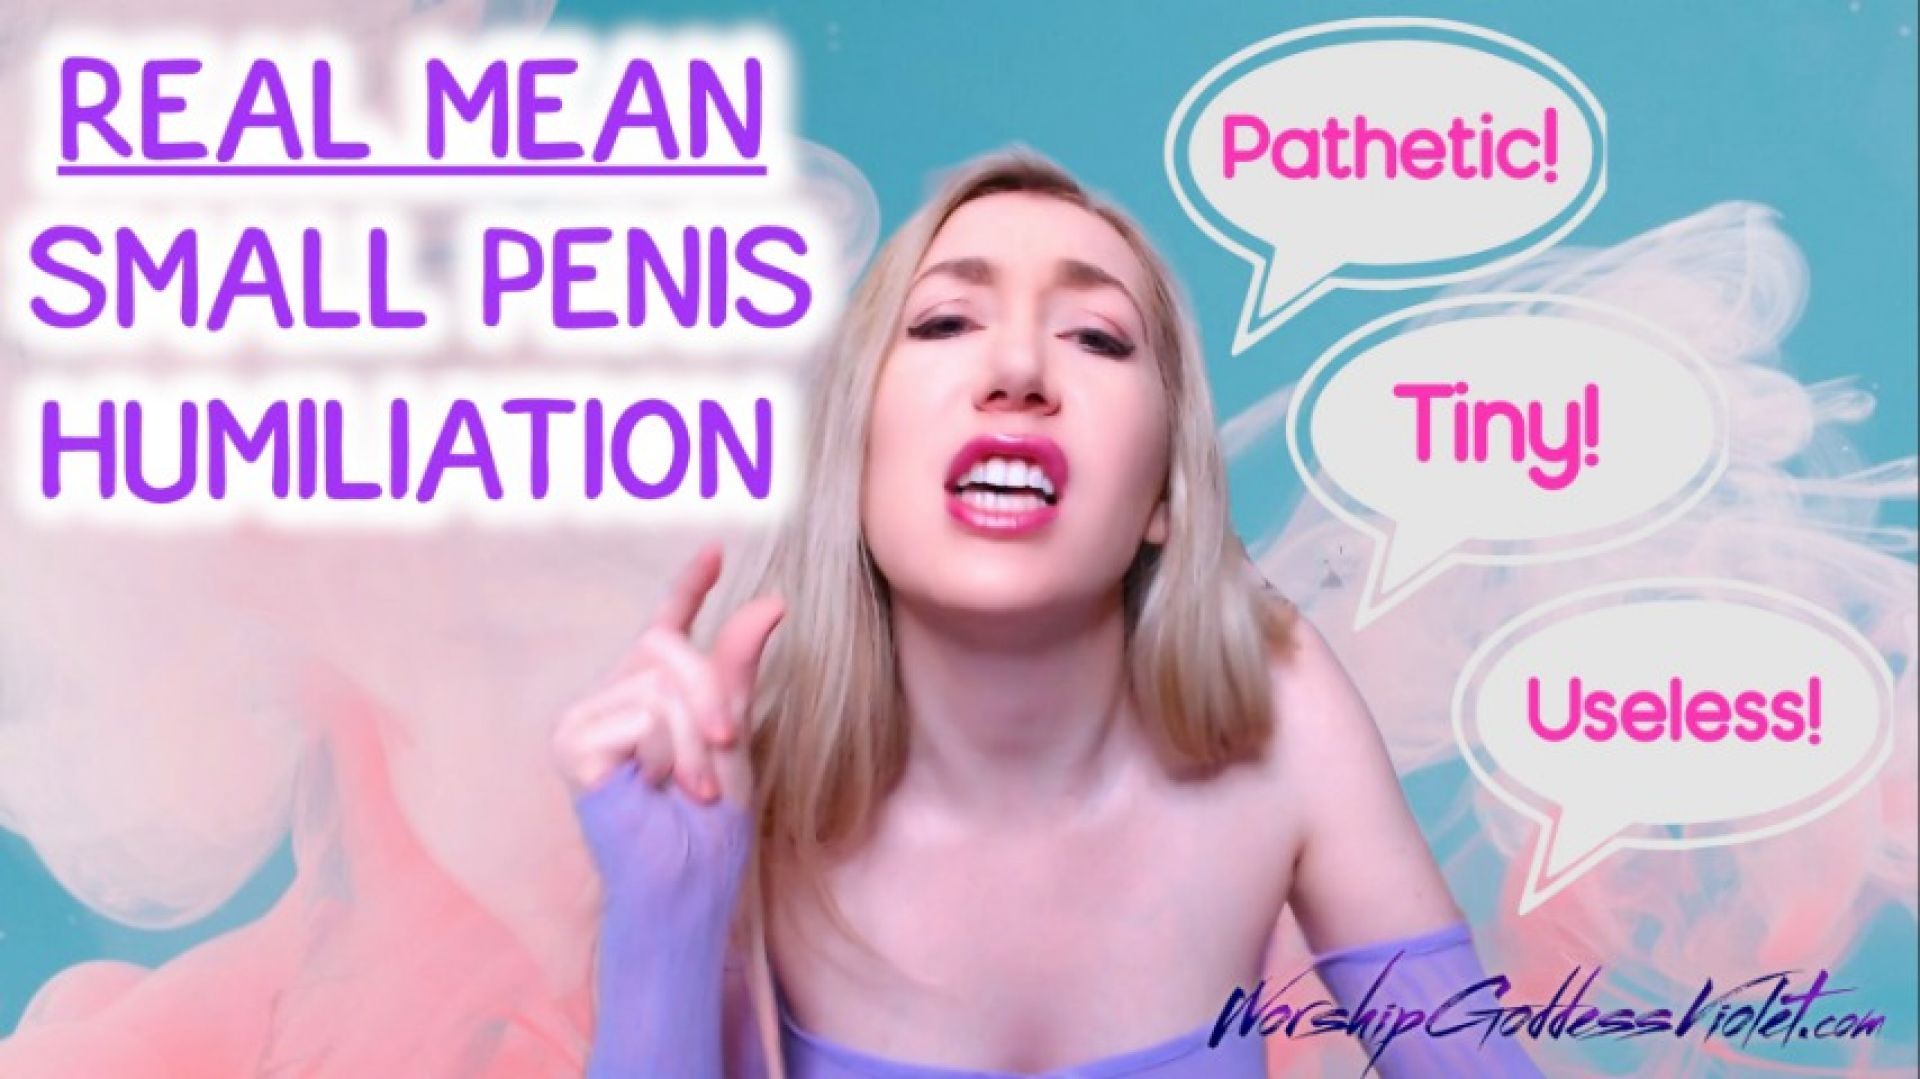 Real Mean Small Penis Humiliation